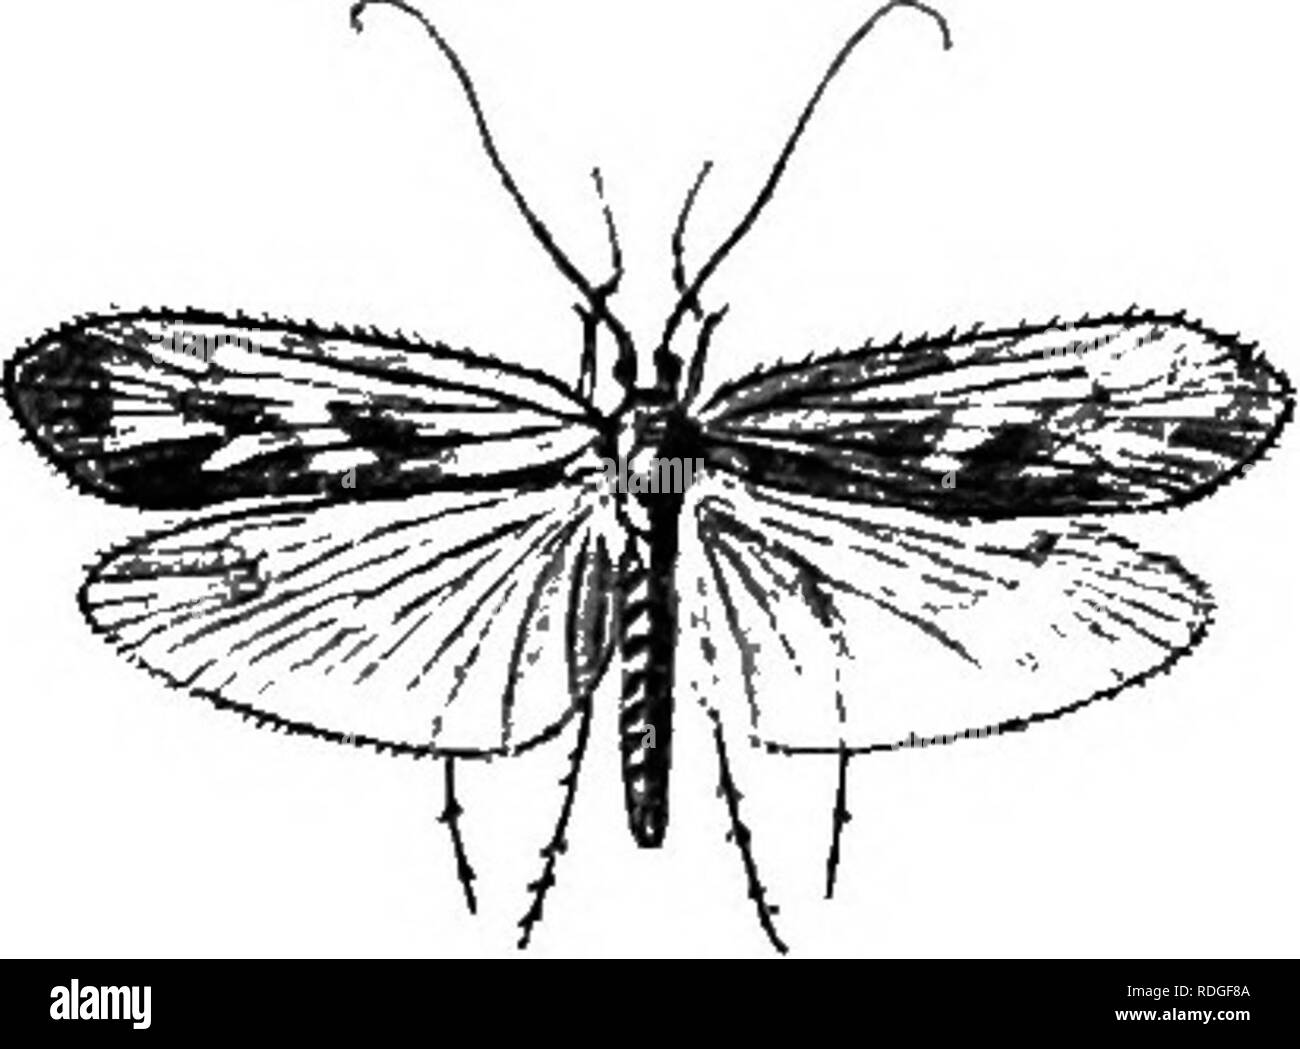 . An introduction to zoology, with directions for practical work (invertebrates). IN SECT A : NEUROPTERA 317 opaque—the characteristic which has led to these forms being sometimes grouped in a special order, the Triduyptera. The nervature of the wings is peculiar in having very few trans- verse nervures (Fig. 240). The broad hind wings are folded fan- wise under the front wings when at rest, the latter being merely laid obliquely over the back and sides, as in the alder-flies. There is a well-marked metamorphosis with a quiescent pupal stage, which takes place below the water. The pupa, howeve Stock Photo